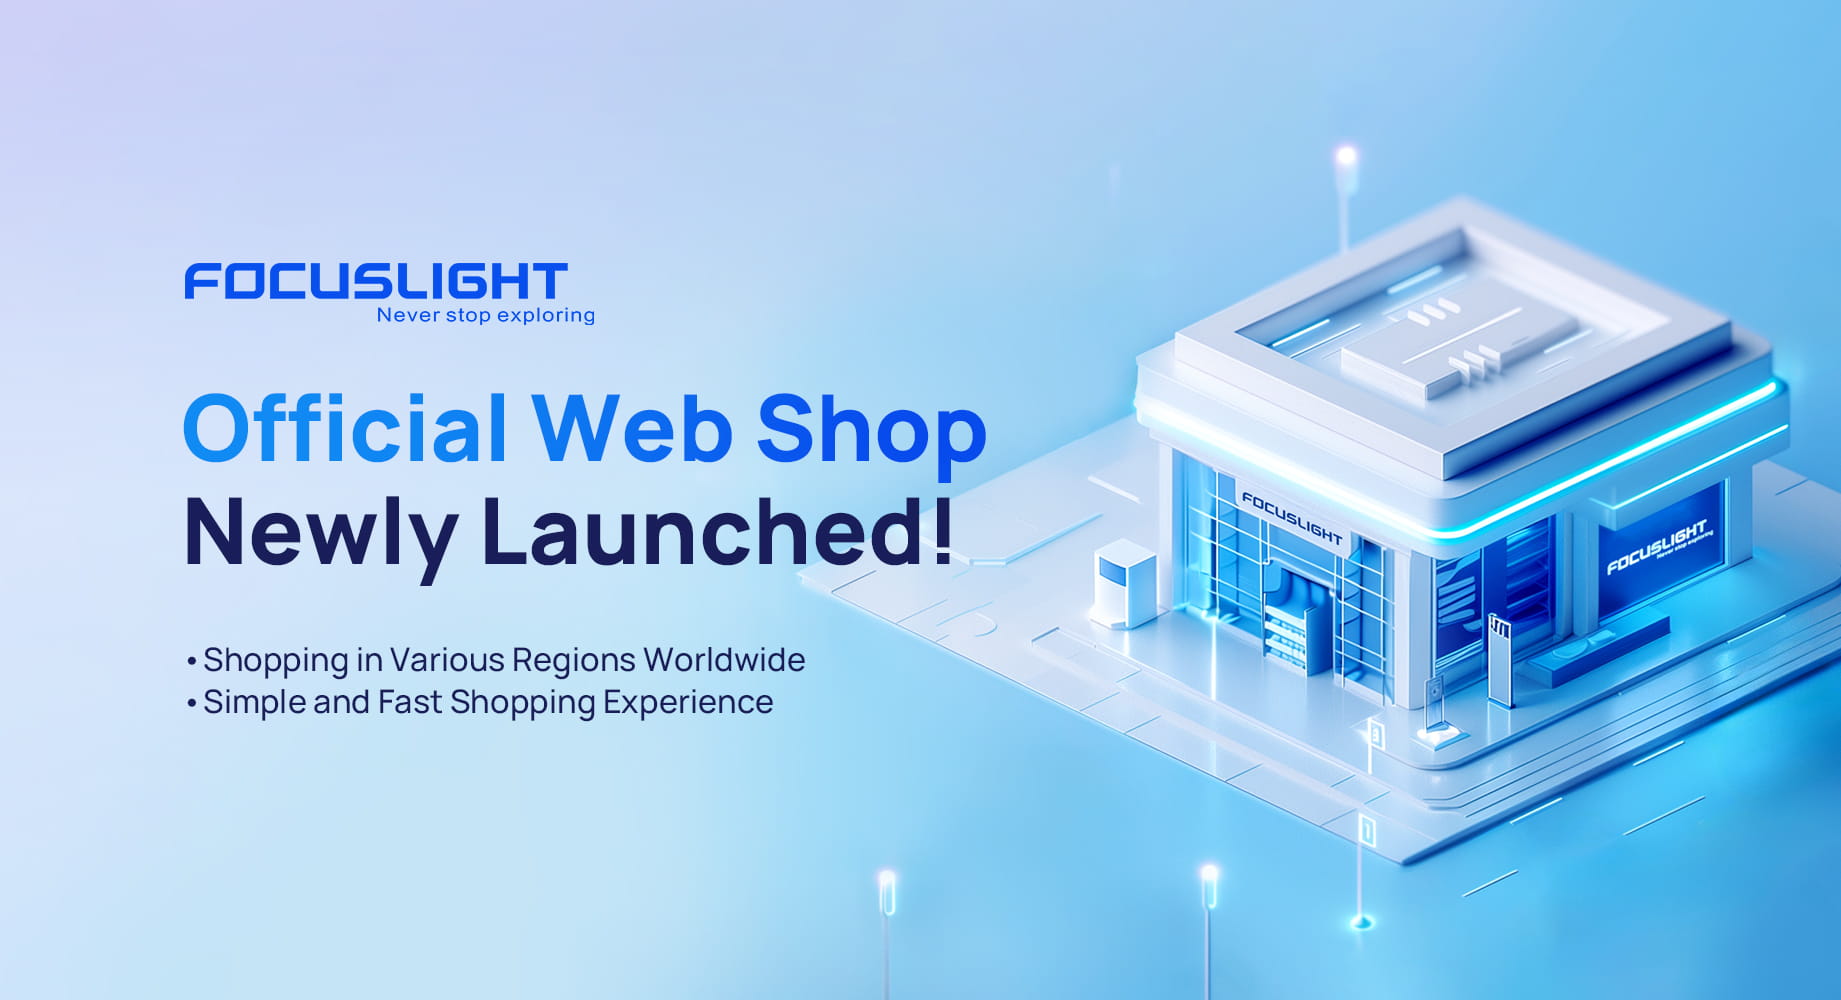 Focuslight Official Web Shop is Newly Launched!